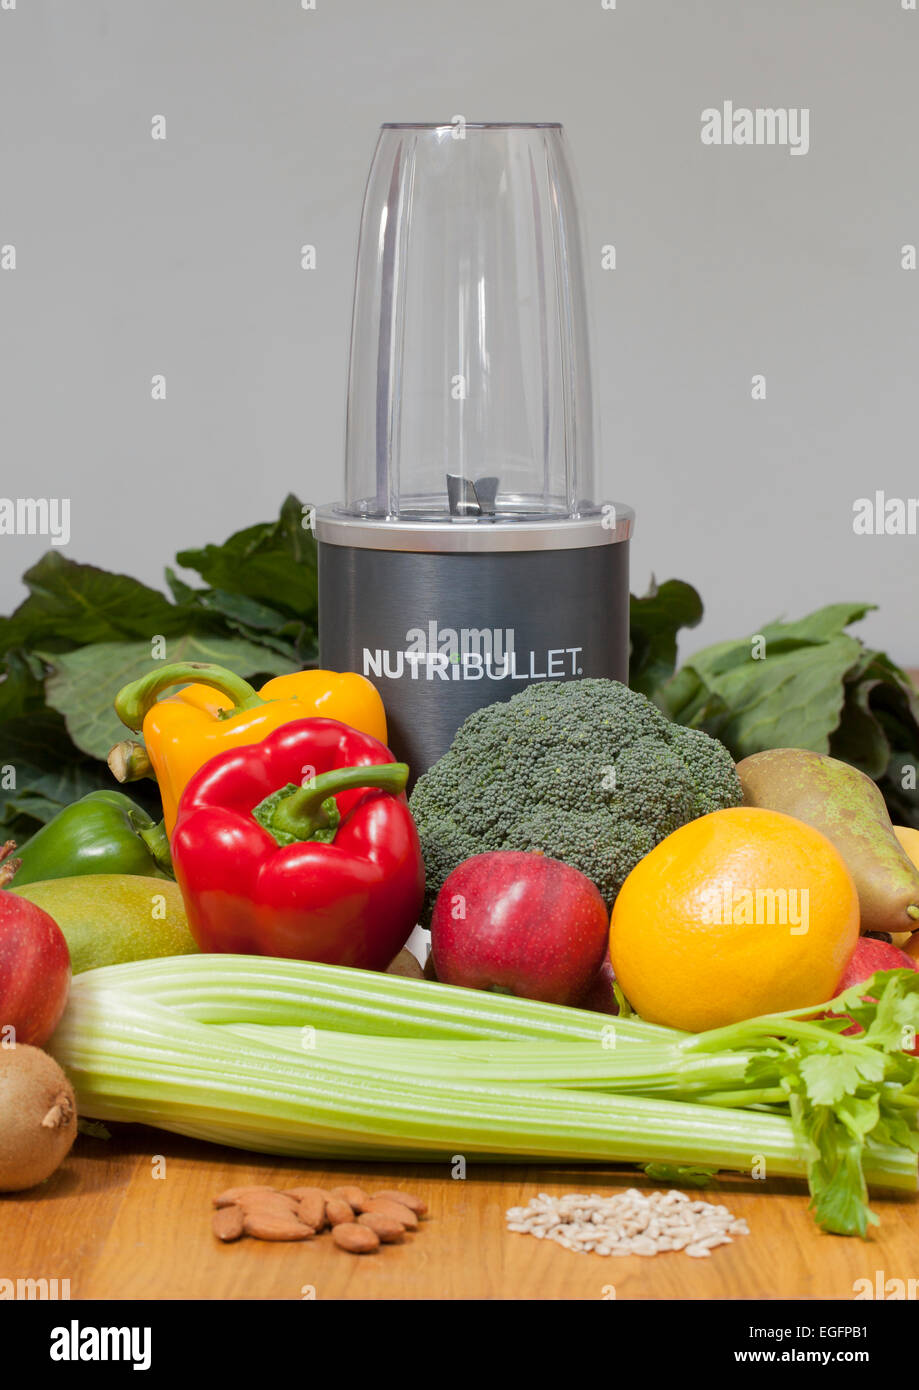 Nutribullet Food Extractor with raw fruit and vegetable ready for extraction Stock Photo